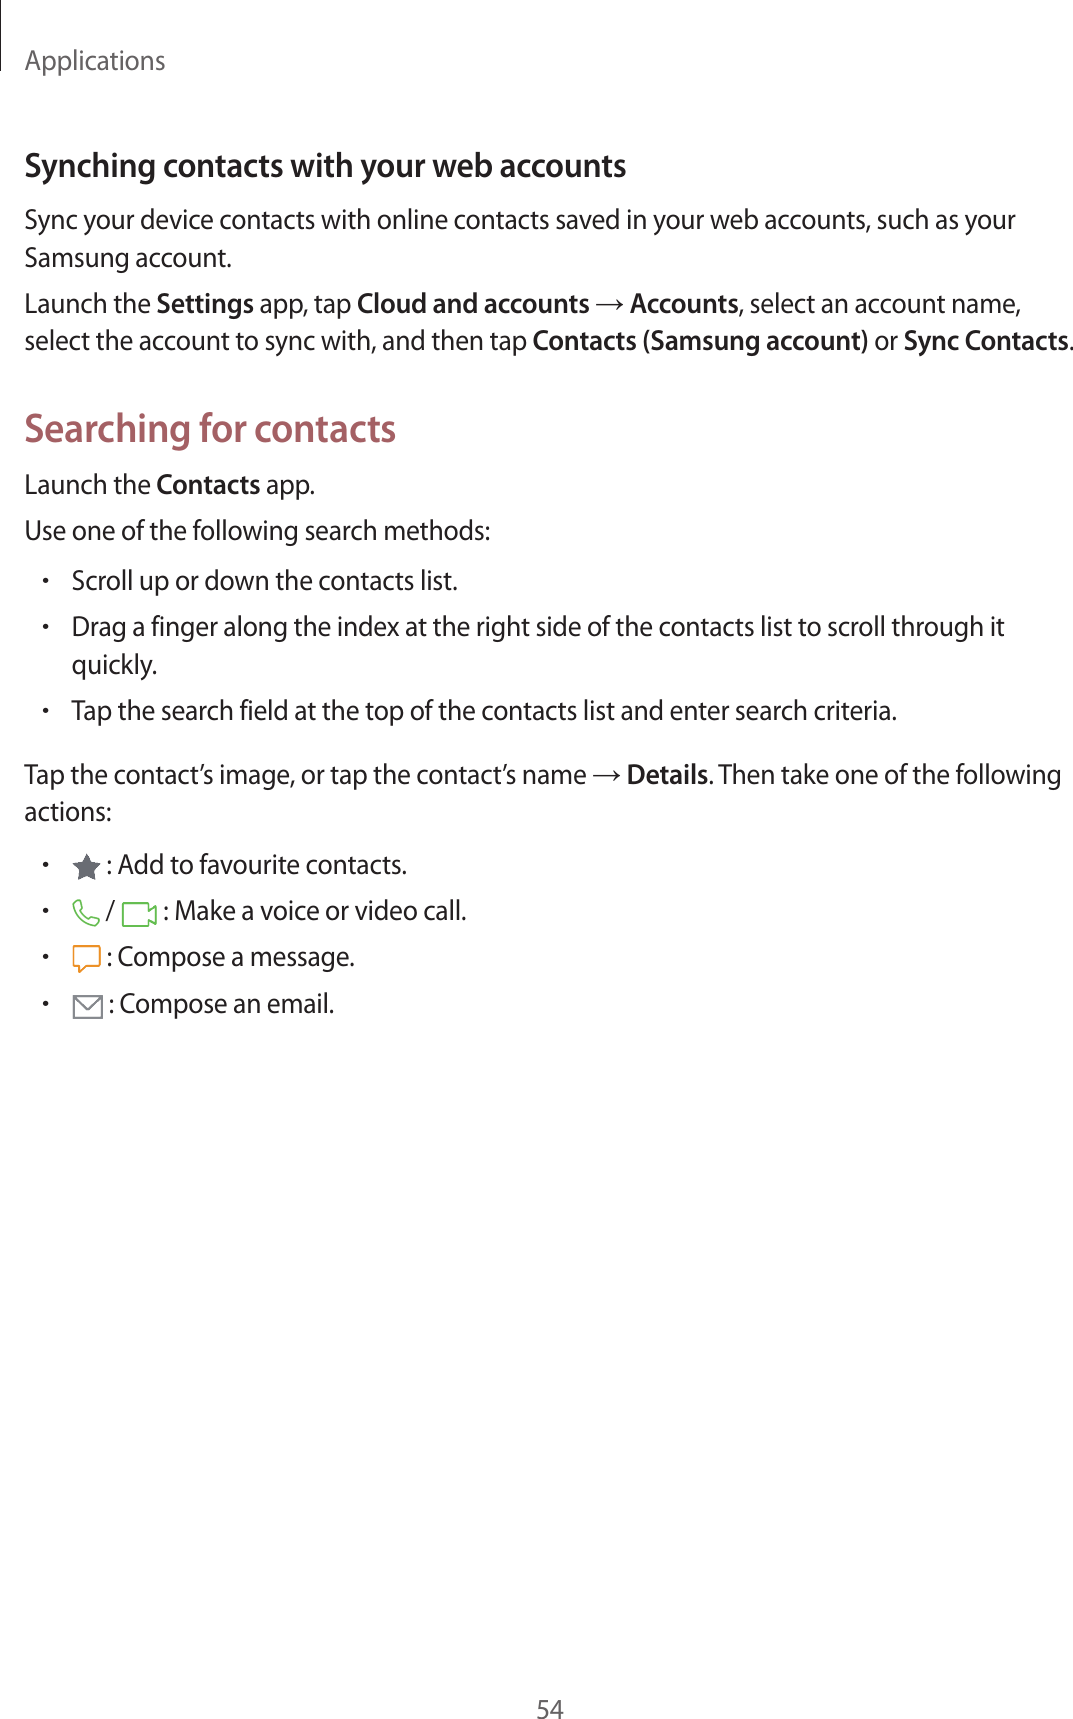 Applications54Synching contacts with your web accountsSync your device contacts with online contacts saved in your web accounts, such as your Samsung account.Launch the Settings app, tap Cloud and accounts → Accounts, select an account name, select the account to sync with, and then tap Contacts (Samsung account) or Sync Contacts.Searching for contactsLaunch the Contacts app.Use one of the following search methods:•Scroll up or down the contacts list.•Drag a finger along the index at the right side of the contacts list to scroll through it quickly.•Tap the search field at the top of the contacts list and enter search criteria.Tap the contact’s image, or tap the contact’s name → Details. Then take one of the following actions:• : Add to favourite contacts.• /   : Make a voice or video call.• : Compose a message.• : Compose an email.